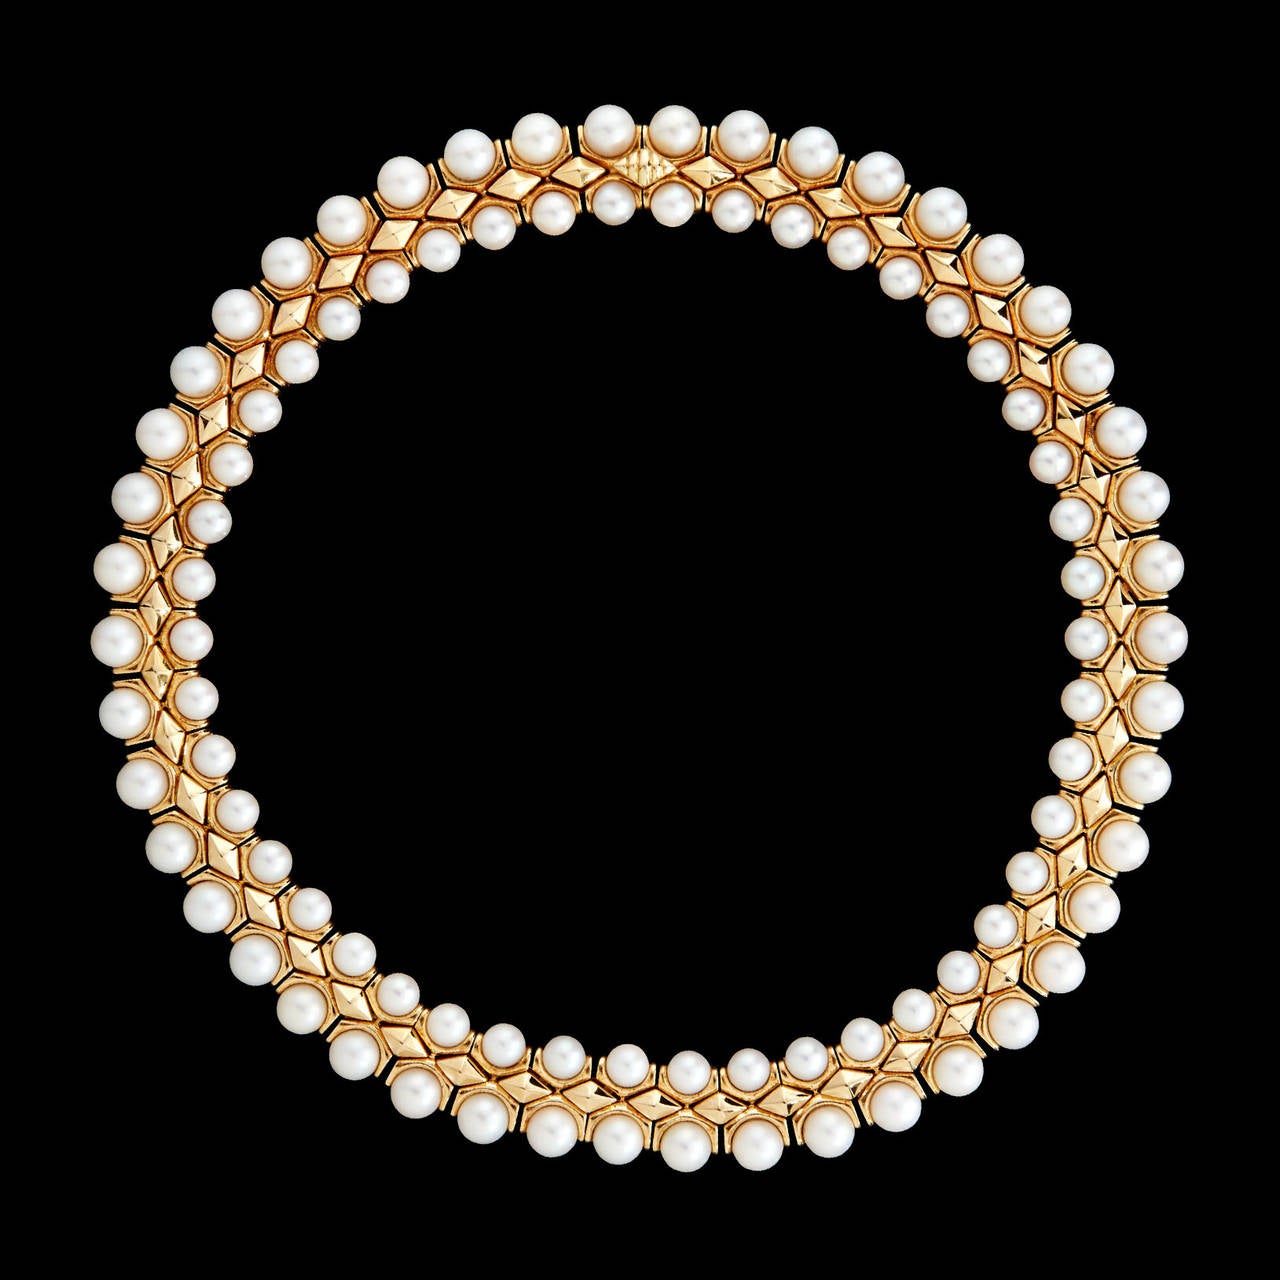 This Fantastic Bulgari Choker Features 92 Cultured Pearls of 7mm & 6mm Diameter in a Unique 18Kt Yellow Gold Setting. The necklace measures 16 inches long and 16mm wide, weighing 152.9 grams.